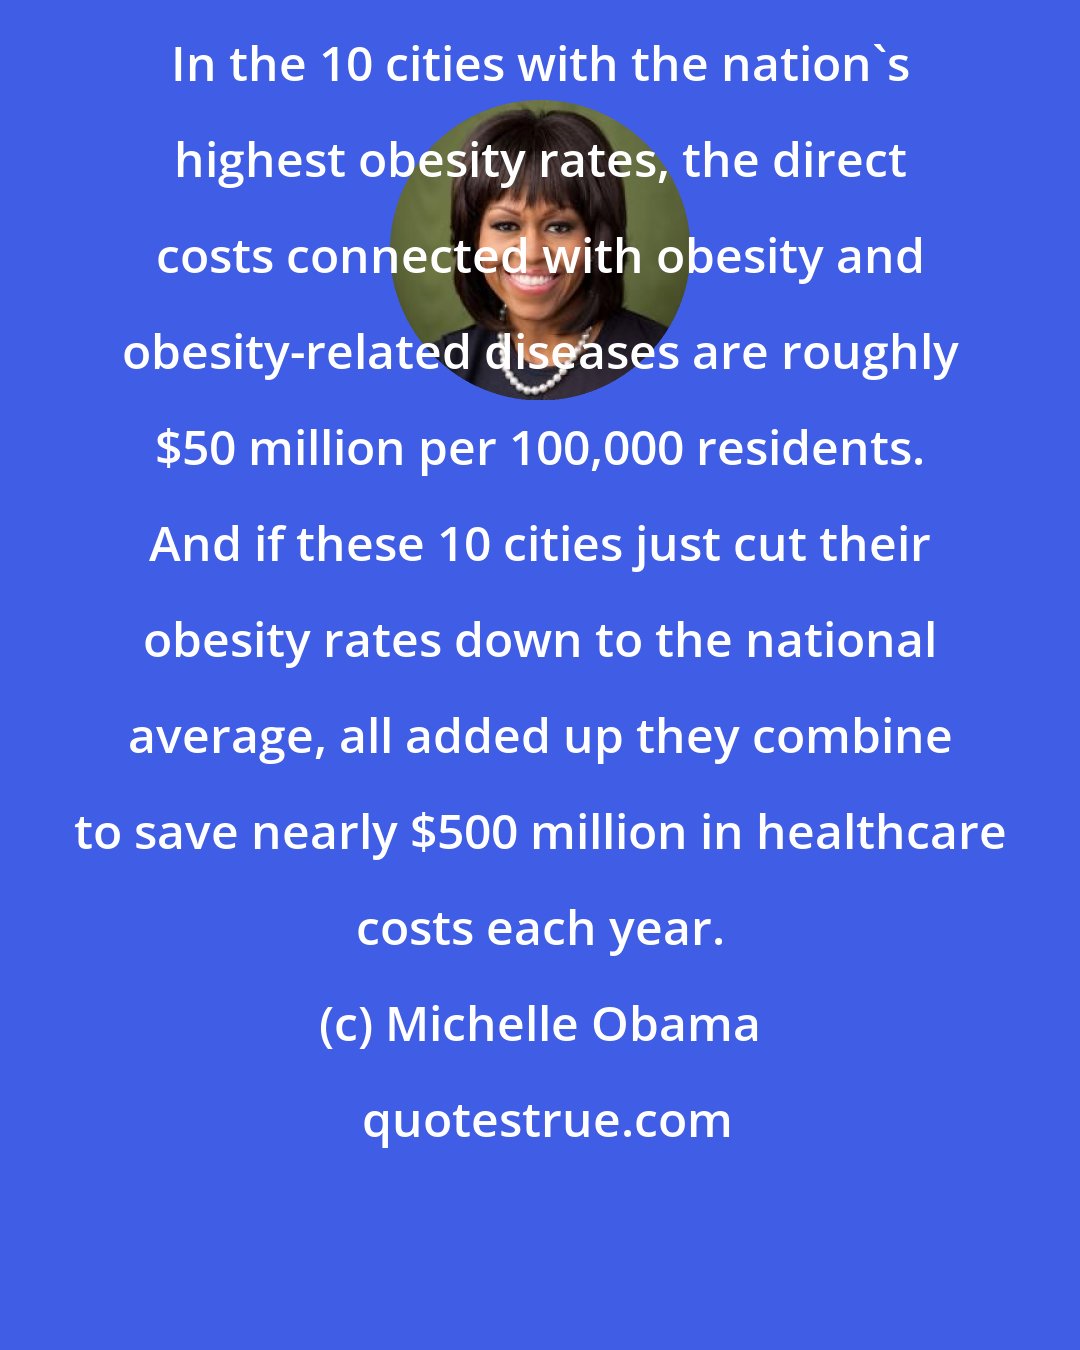 Michelle Obama: In the 10 cities with the nation's highest obesity rates, the direct costs connected with obesity and obesity-related diseases are roughly $50 million per 100,000 residents. And if these 10 cities just cut their obesity rates down to the national average, all added up they combine to save nearly $500 million in healthcare costs each year.